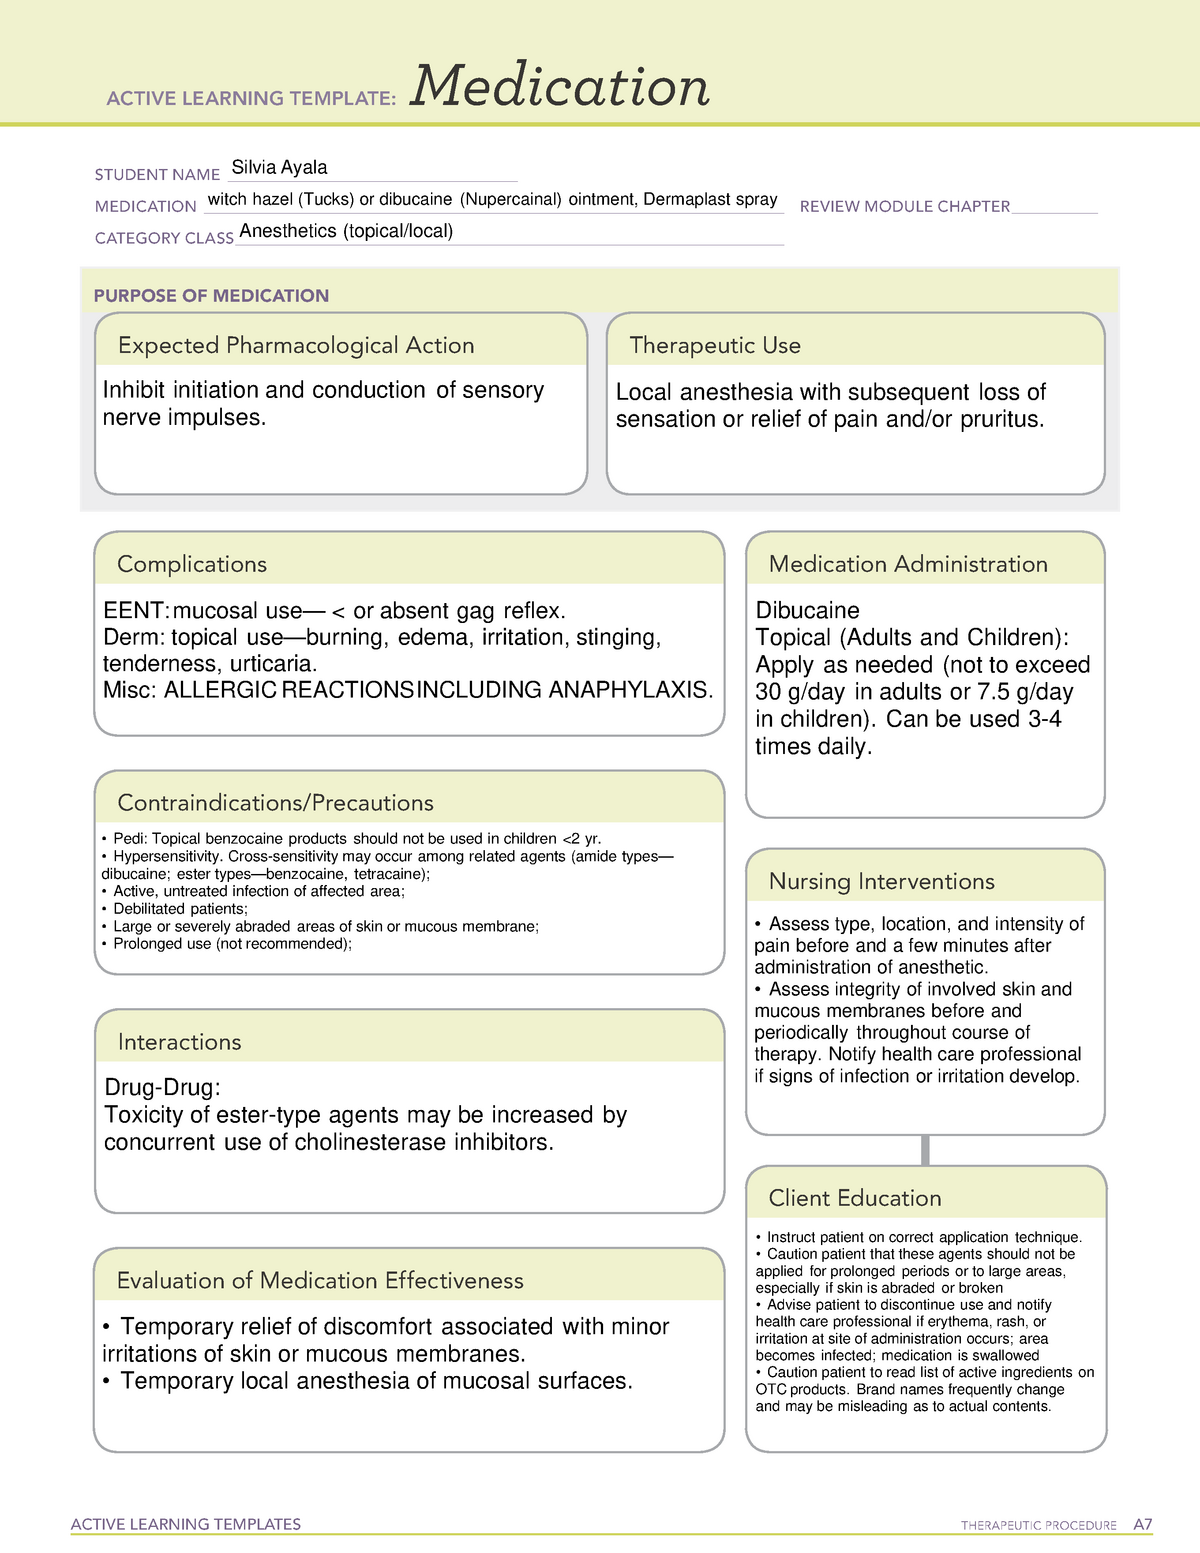 Topical for perineum Med Template - ACTIVE LEARNING TEMPLATES ...